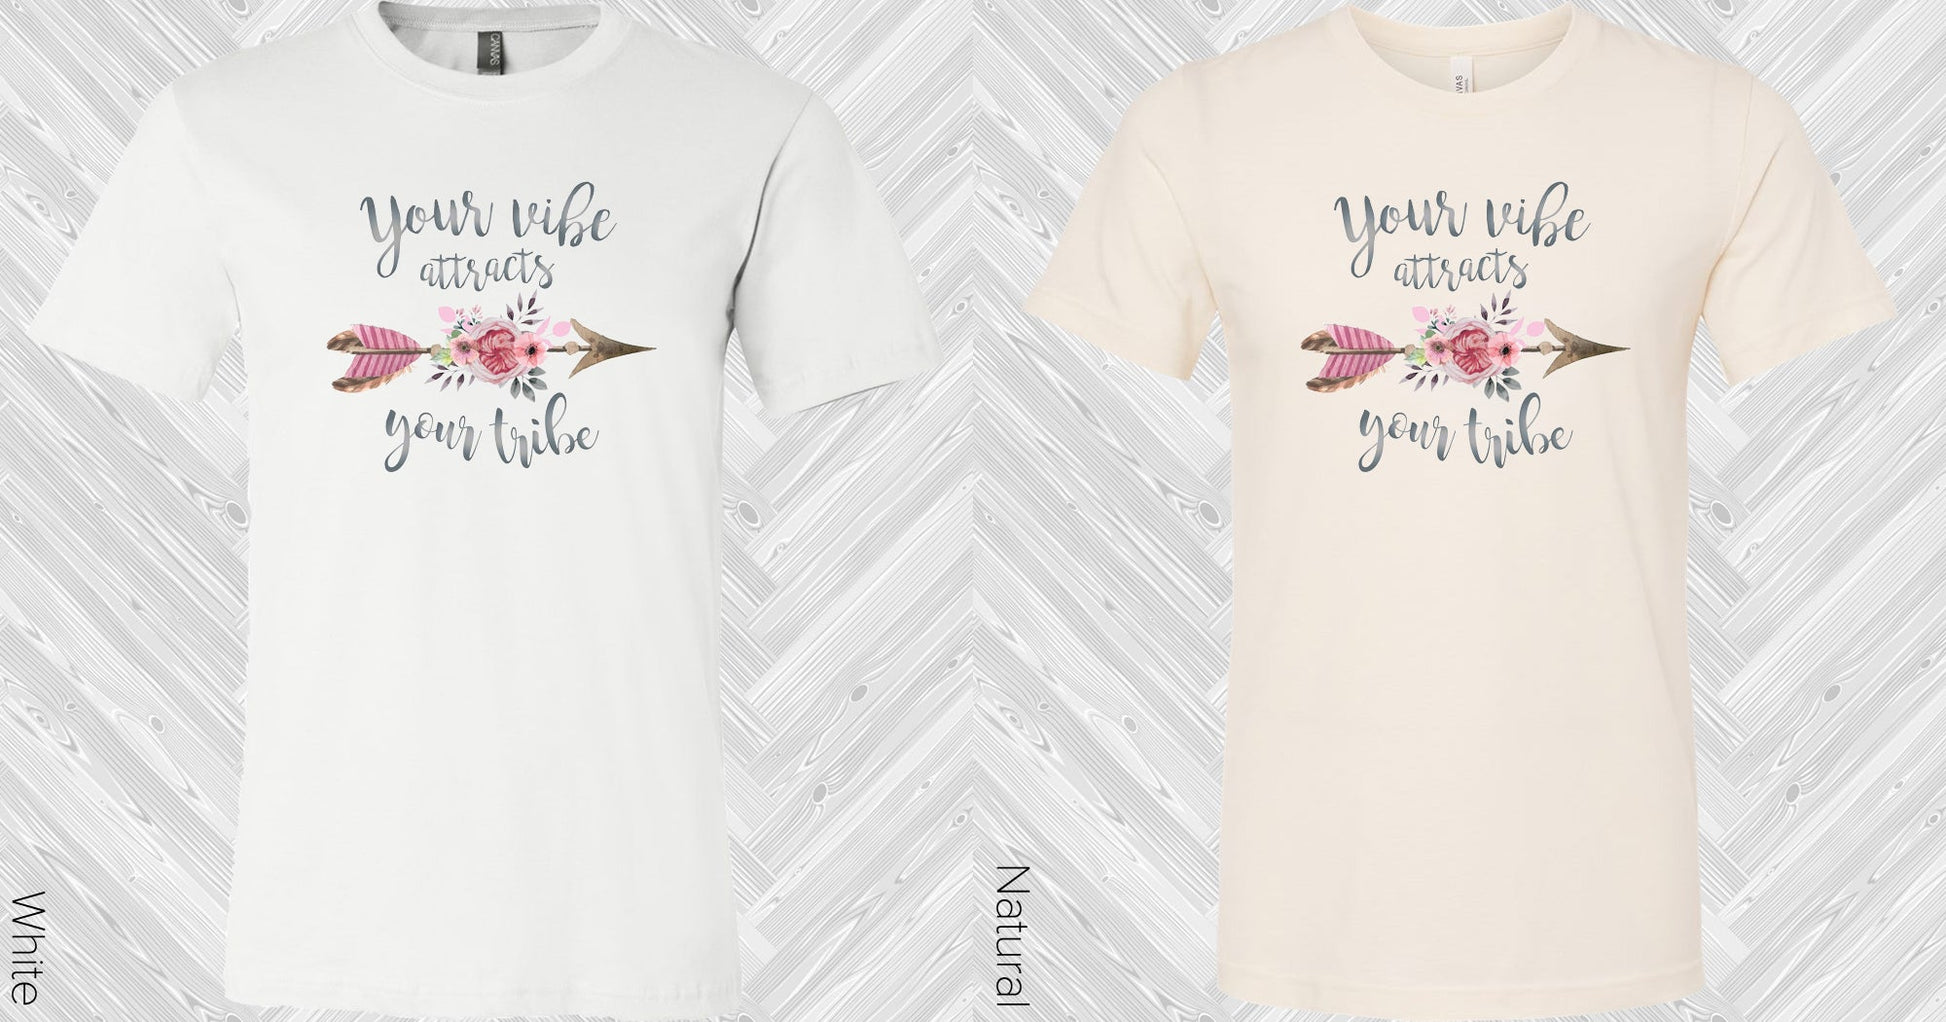 Your Vibe Attracts Tribe Graphic Tee Graphic Tee